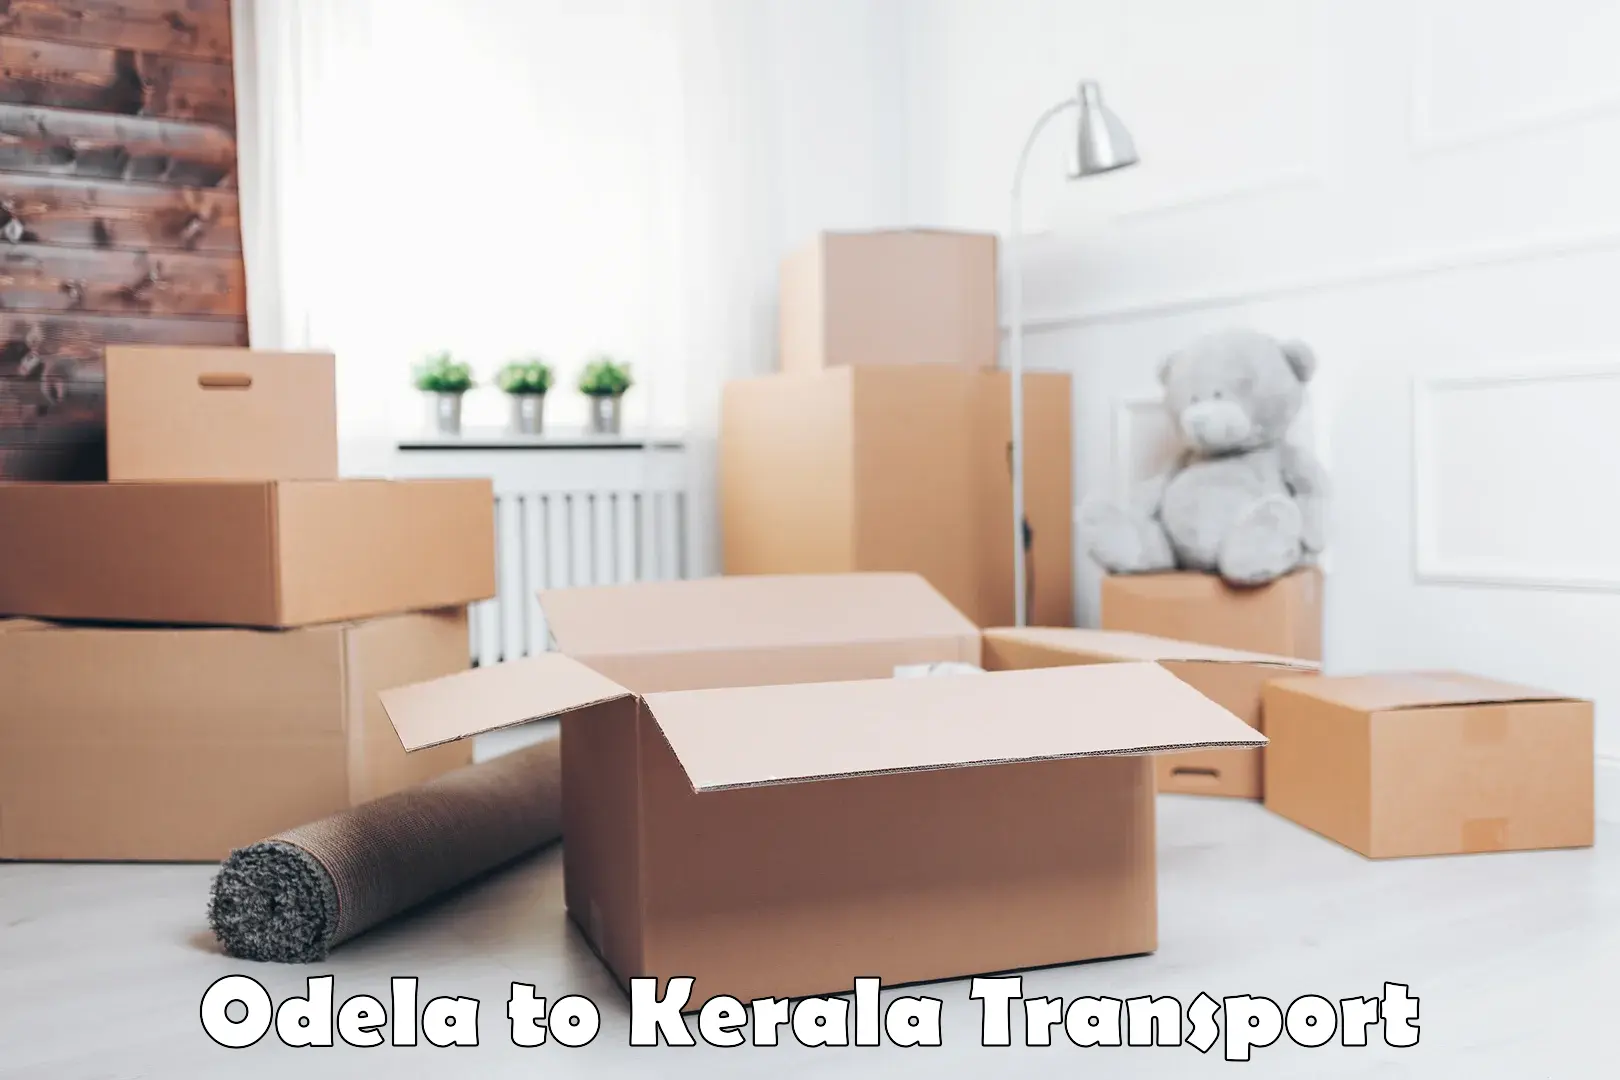 Lorry transport service Odela to Cochin University of Science and Technology